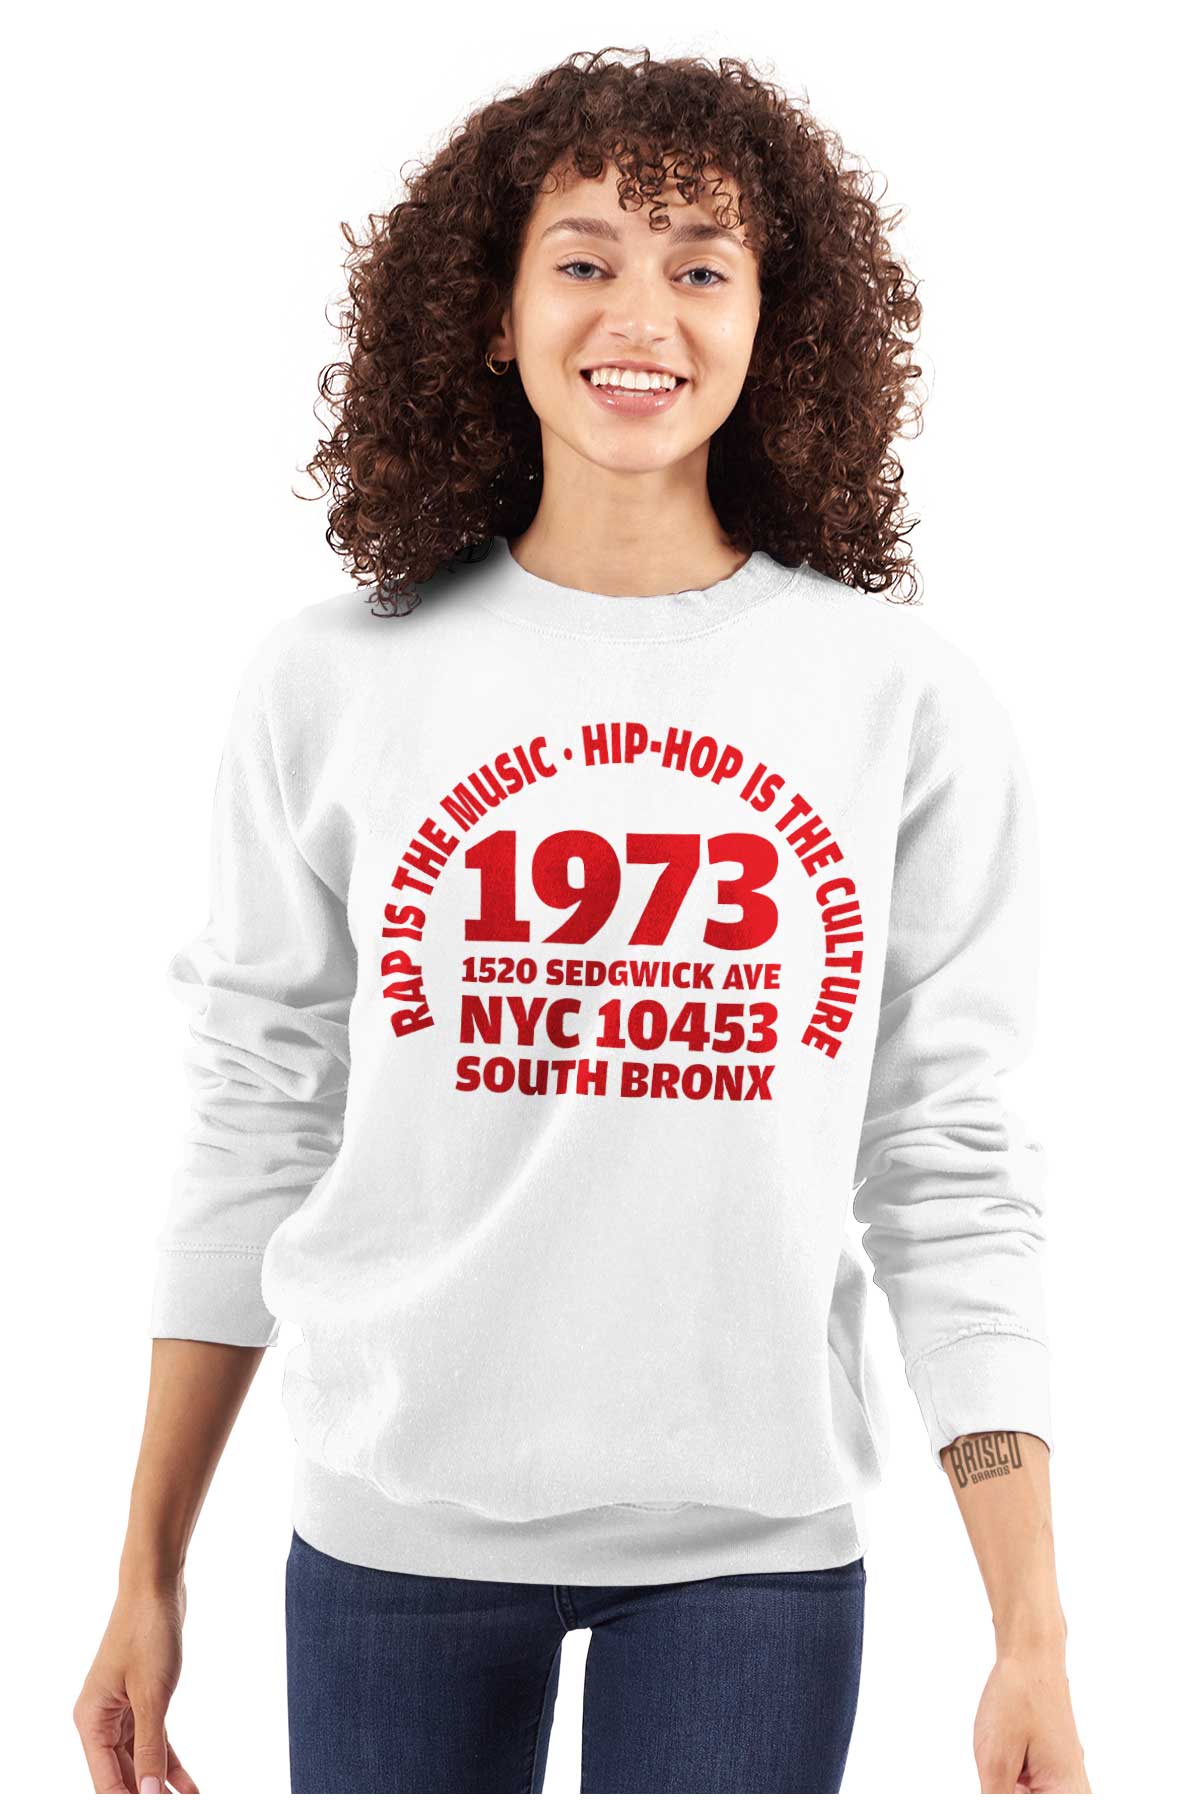 This image represents the start of Hip Hop in 1973 and honors 50 years of music, by mentioning the 1520 Sedwick Avenue address, the birthplace of Hip-Hop.